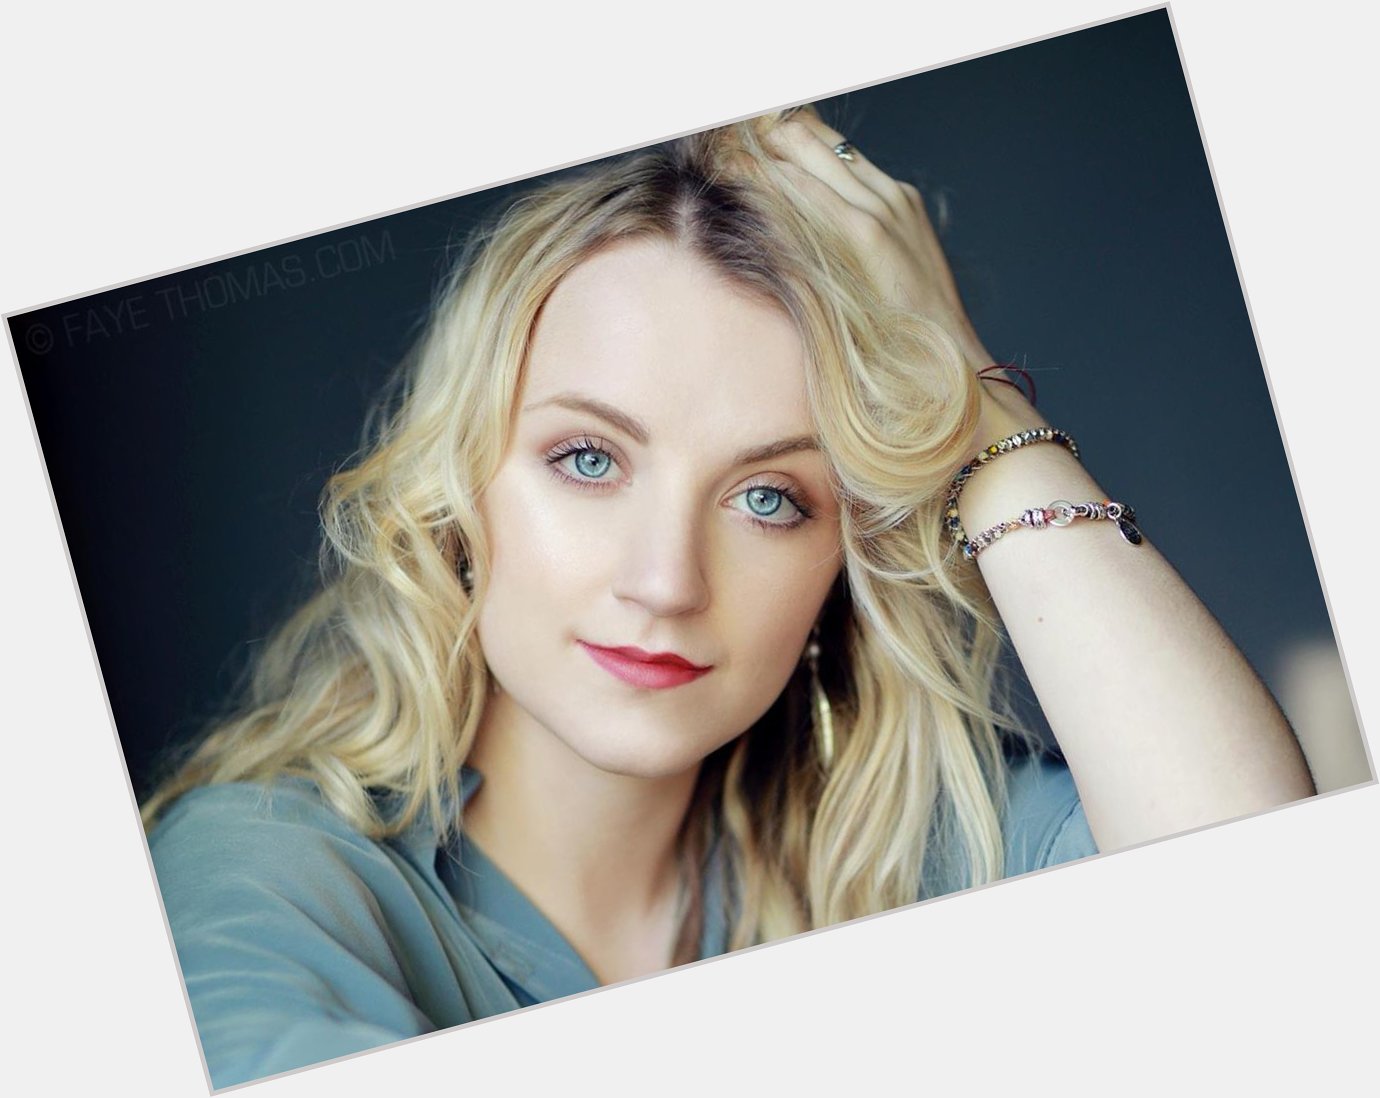 August 16, 2020
Happy birthday to Evanna Lynch 29 years old. 